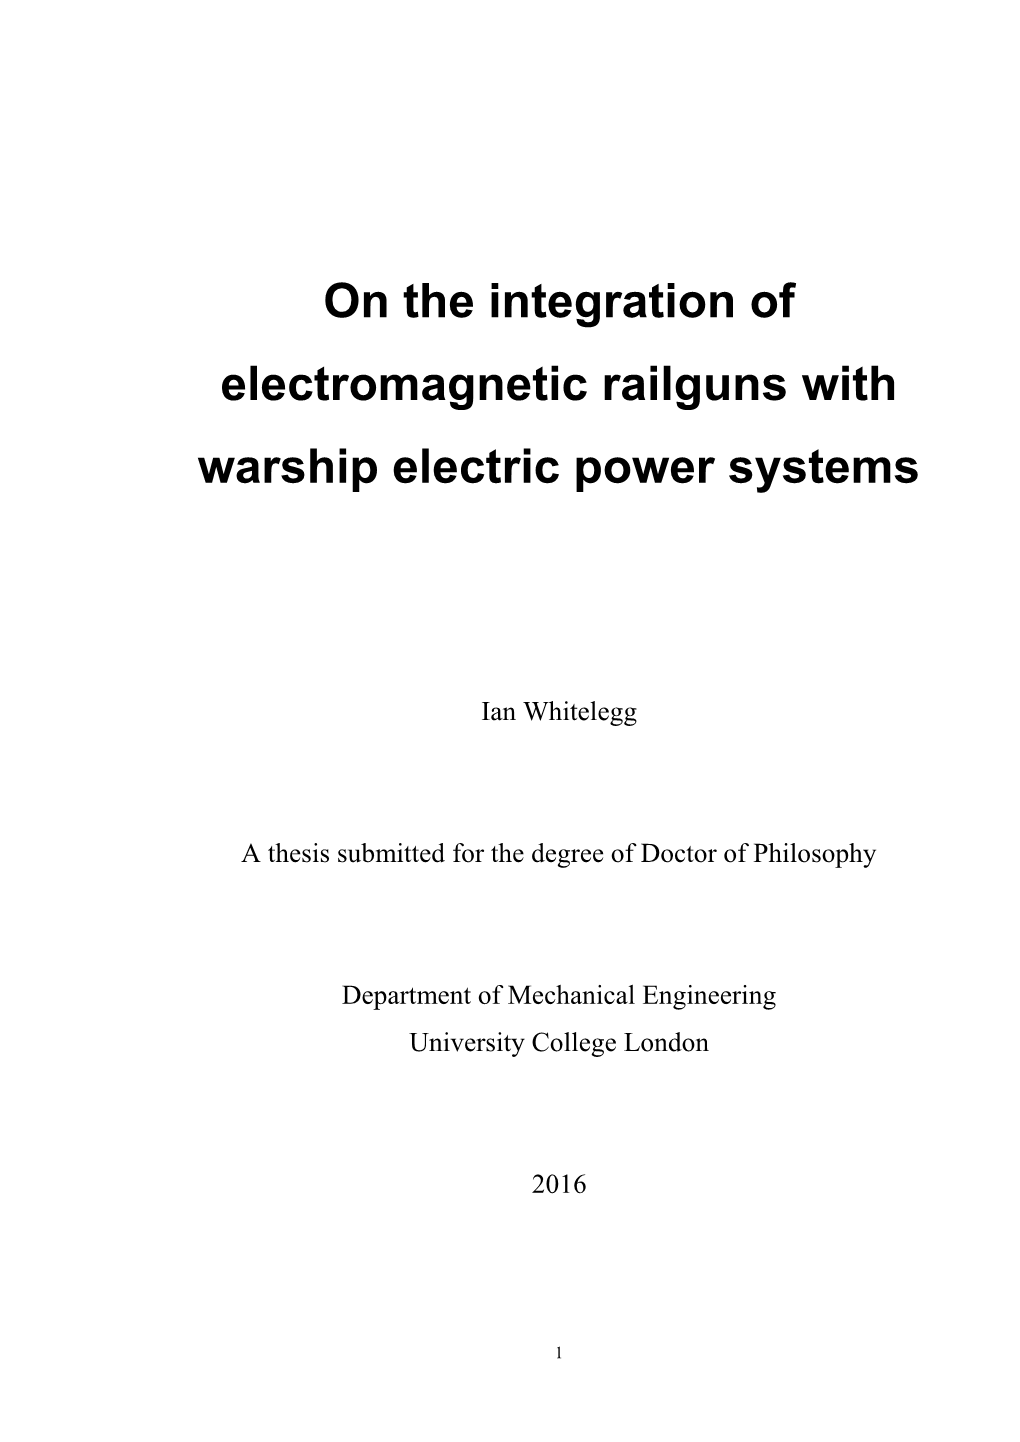 On the Integration of Electromagnetic Railguns with Warship Electric Power Systems